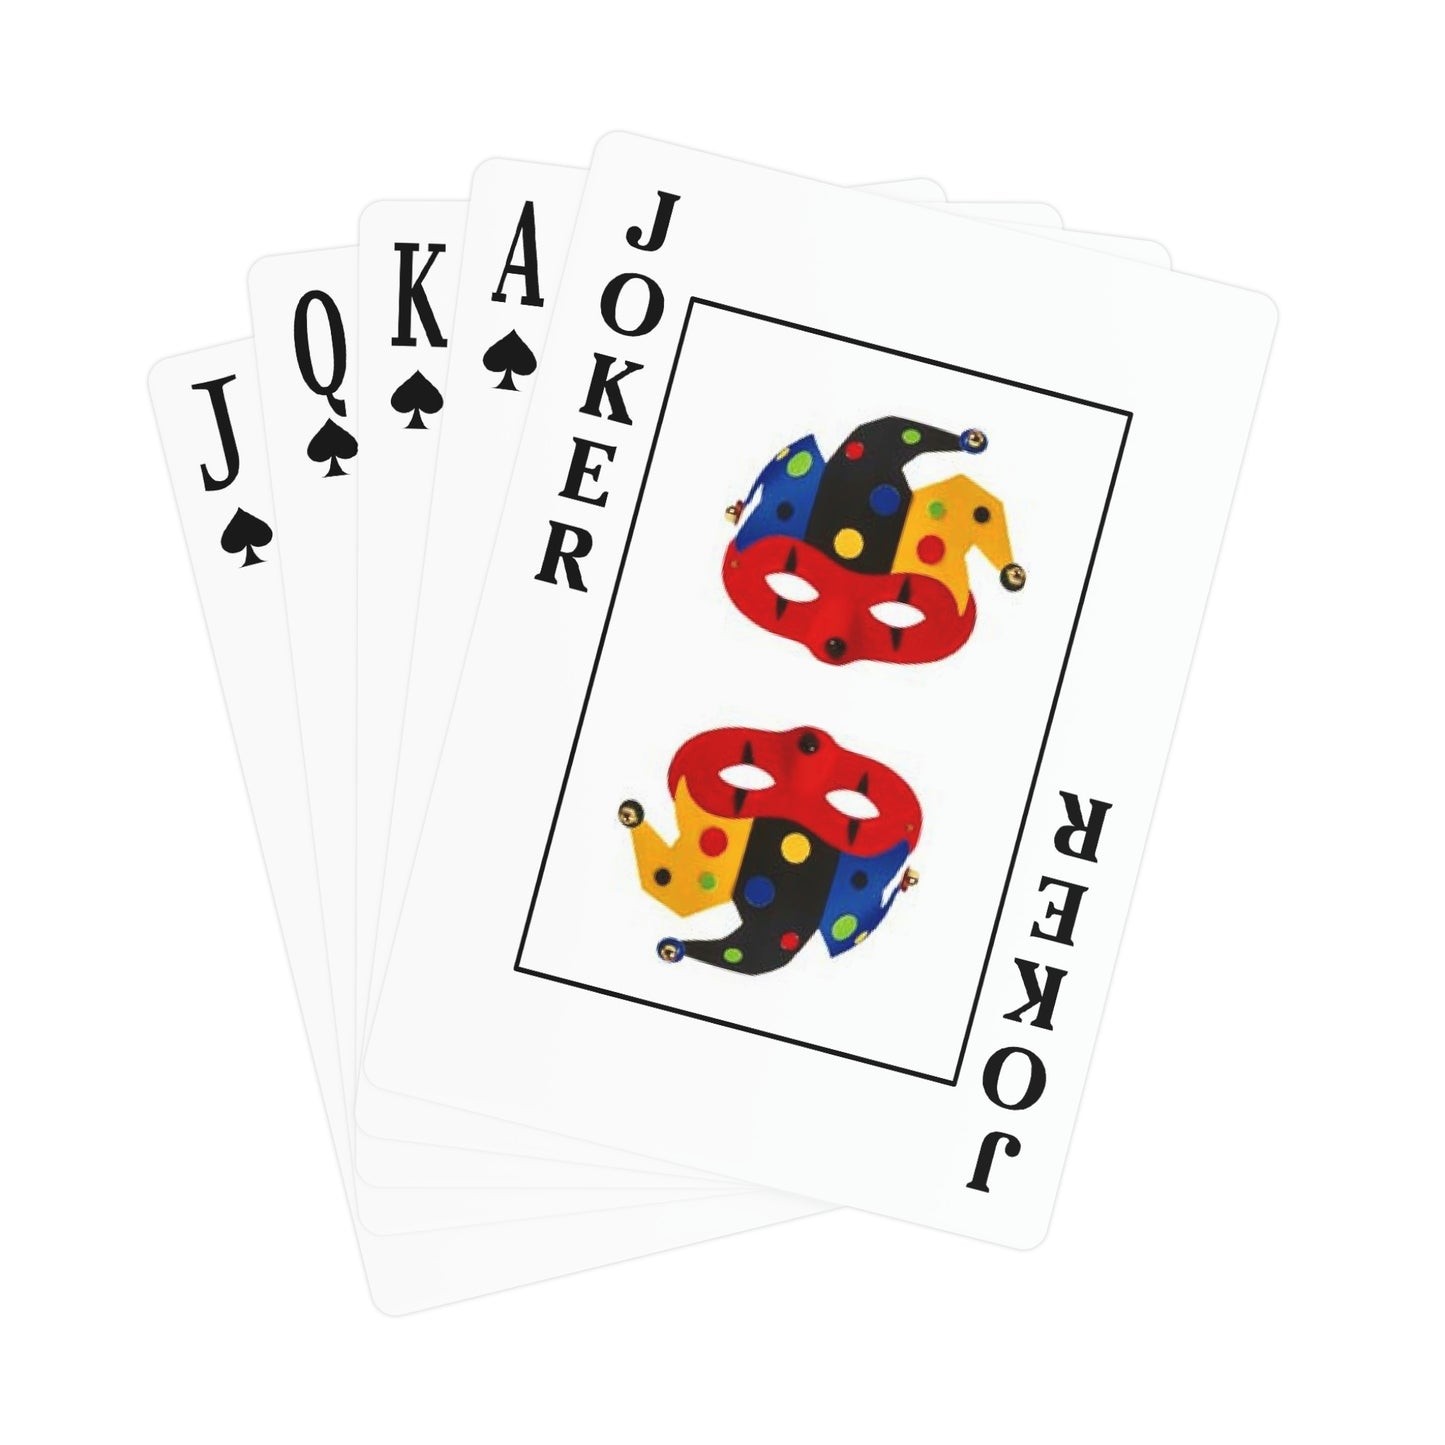 Suriax - Playing Cards